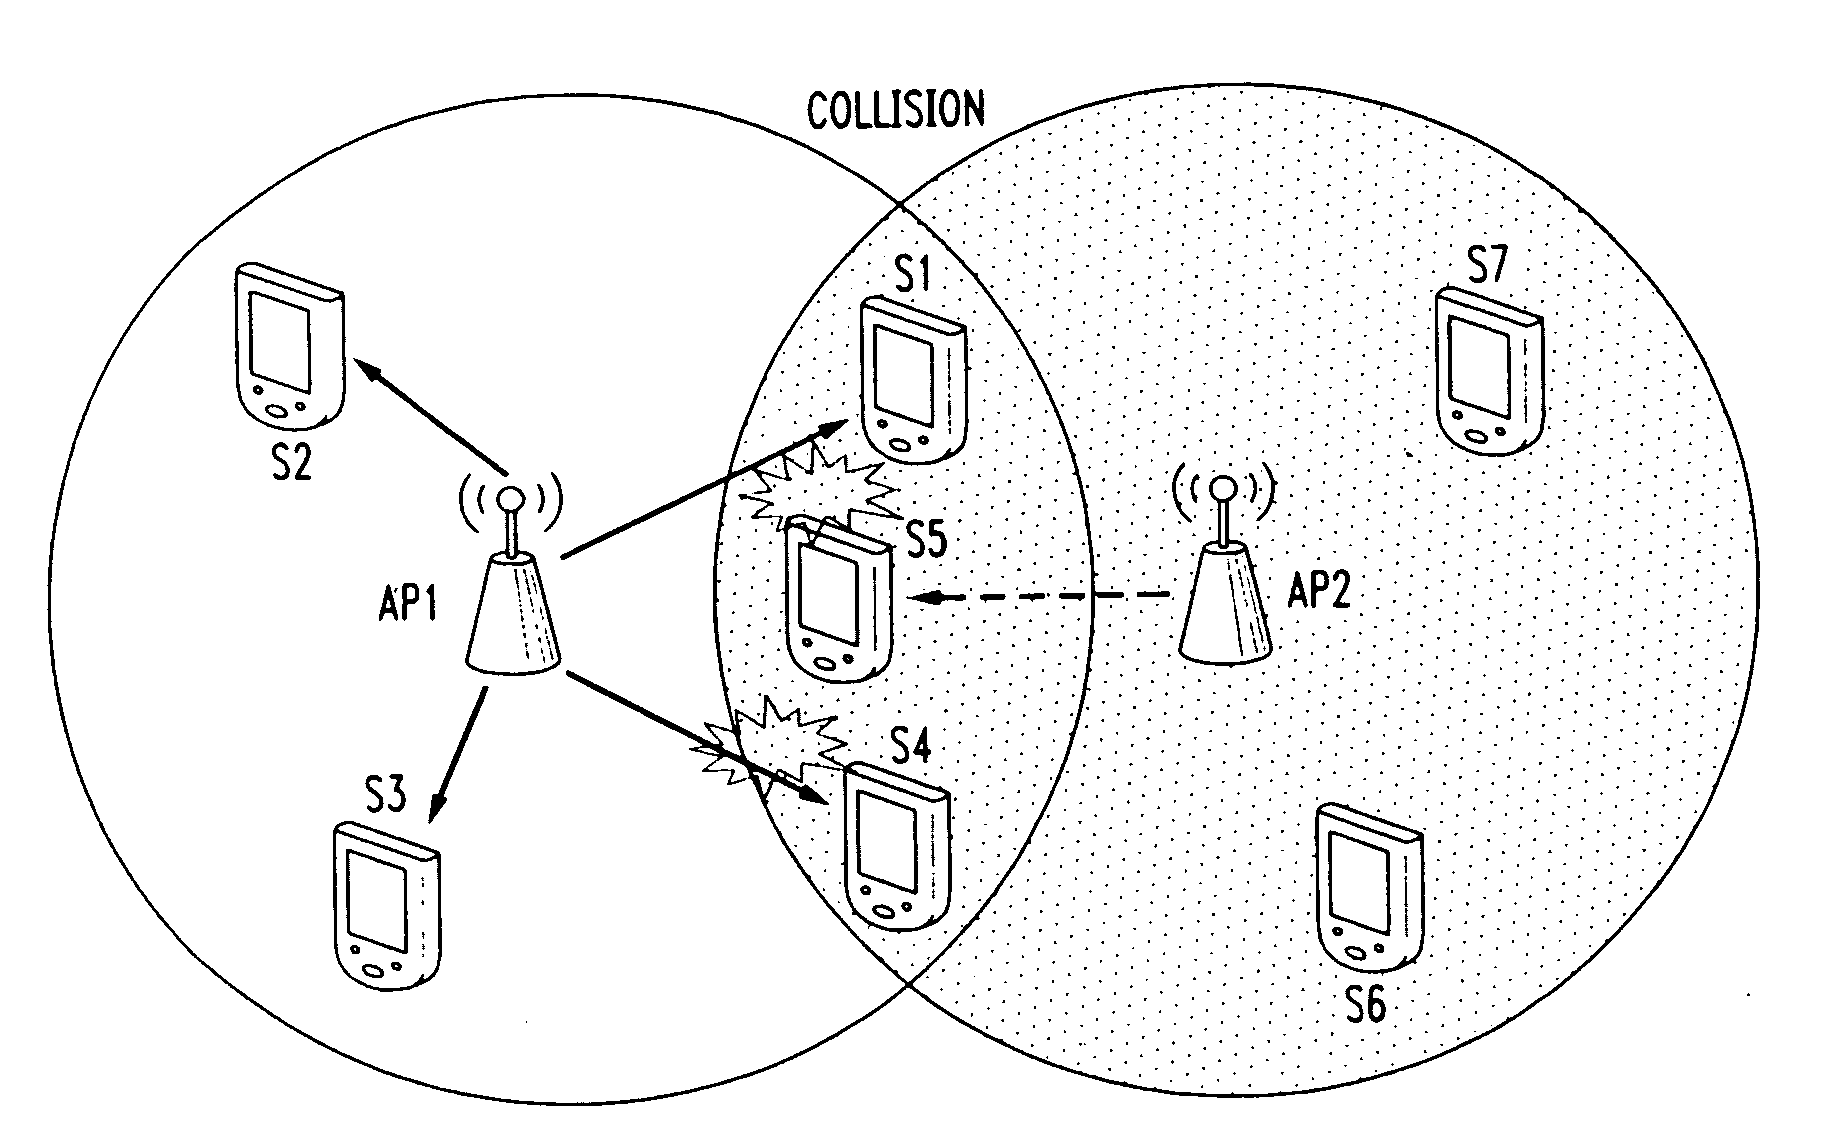 Apparatus for multicast transmissions in wireless local area networks